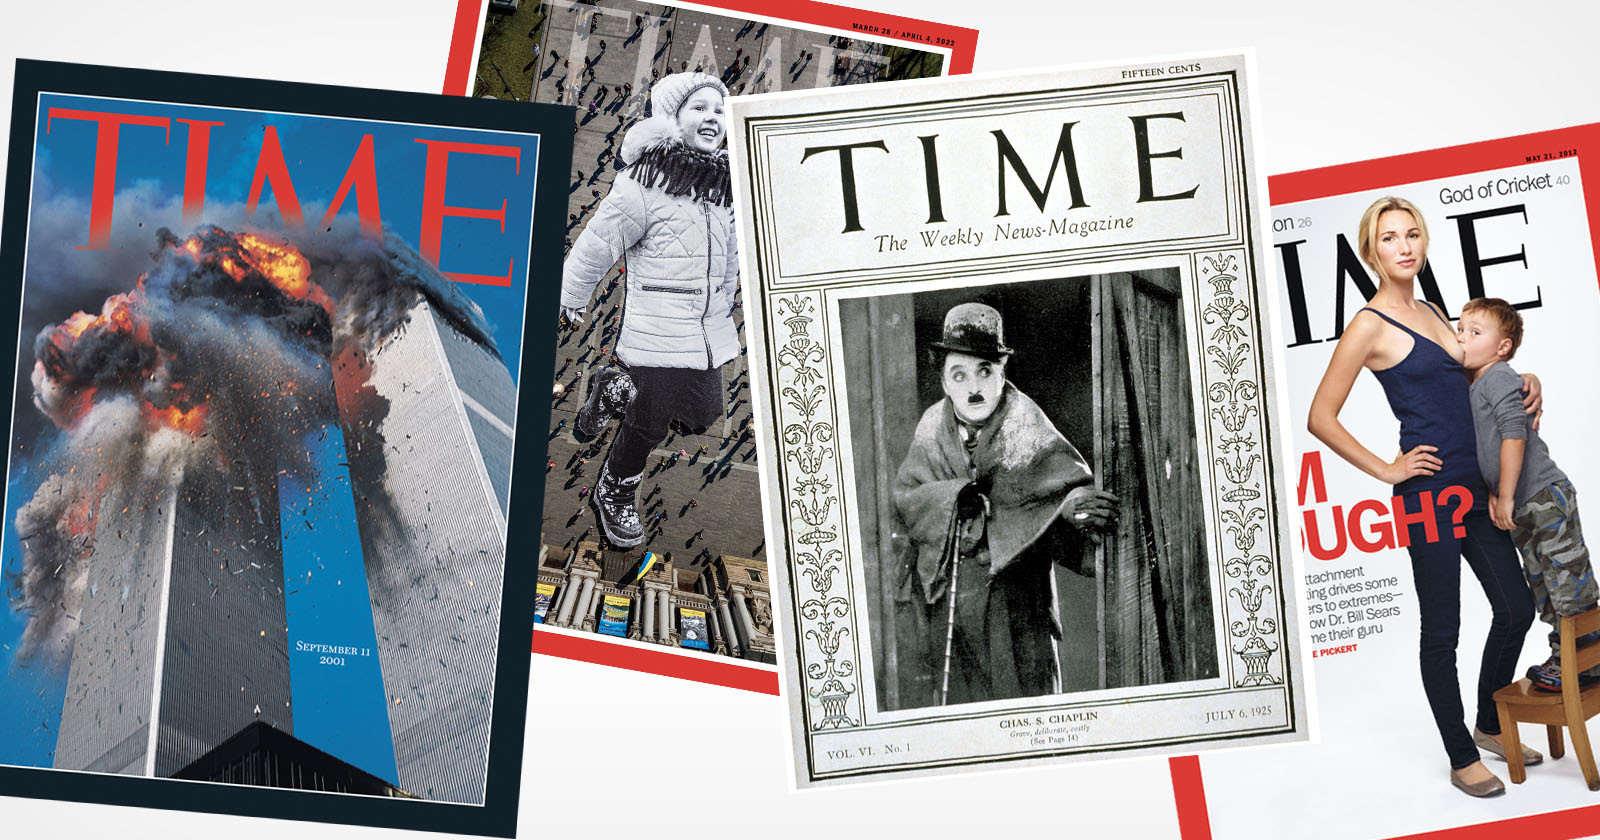  100 years time magazine through some its iconic 